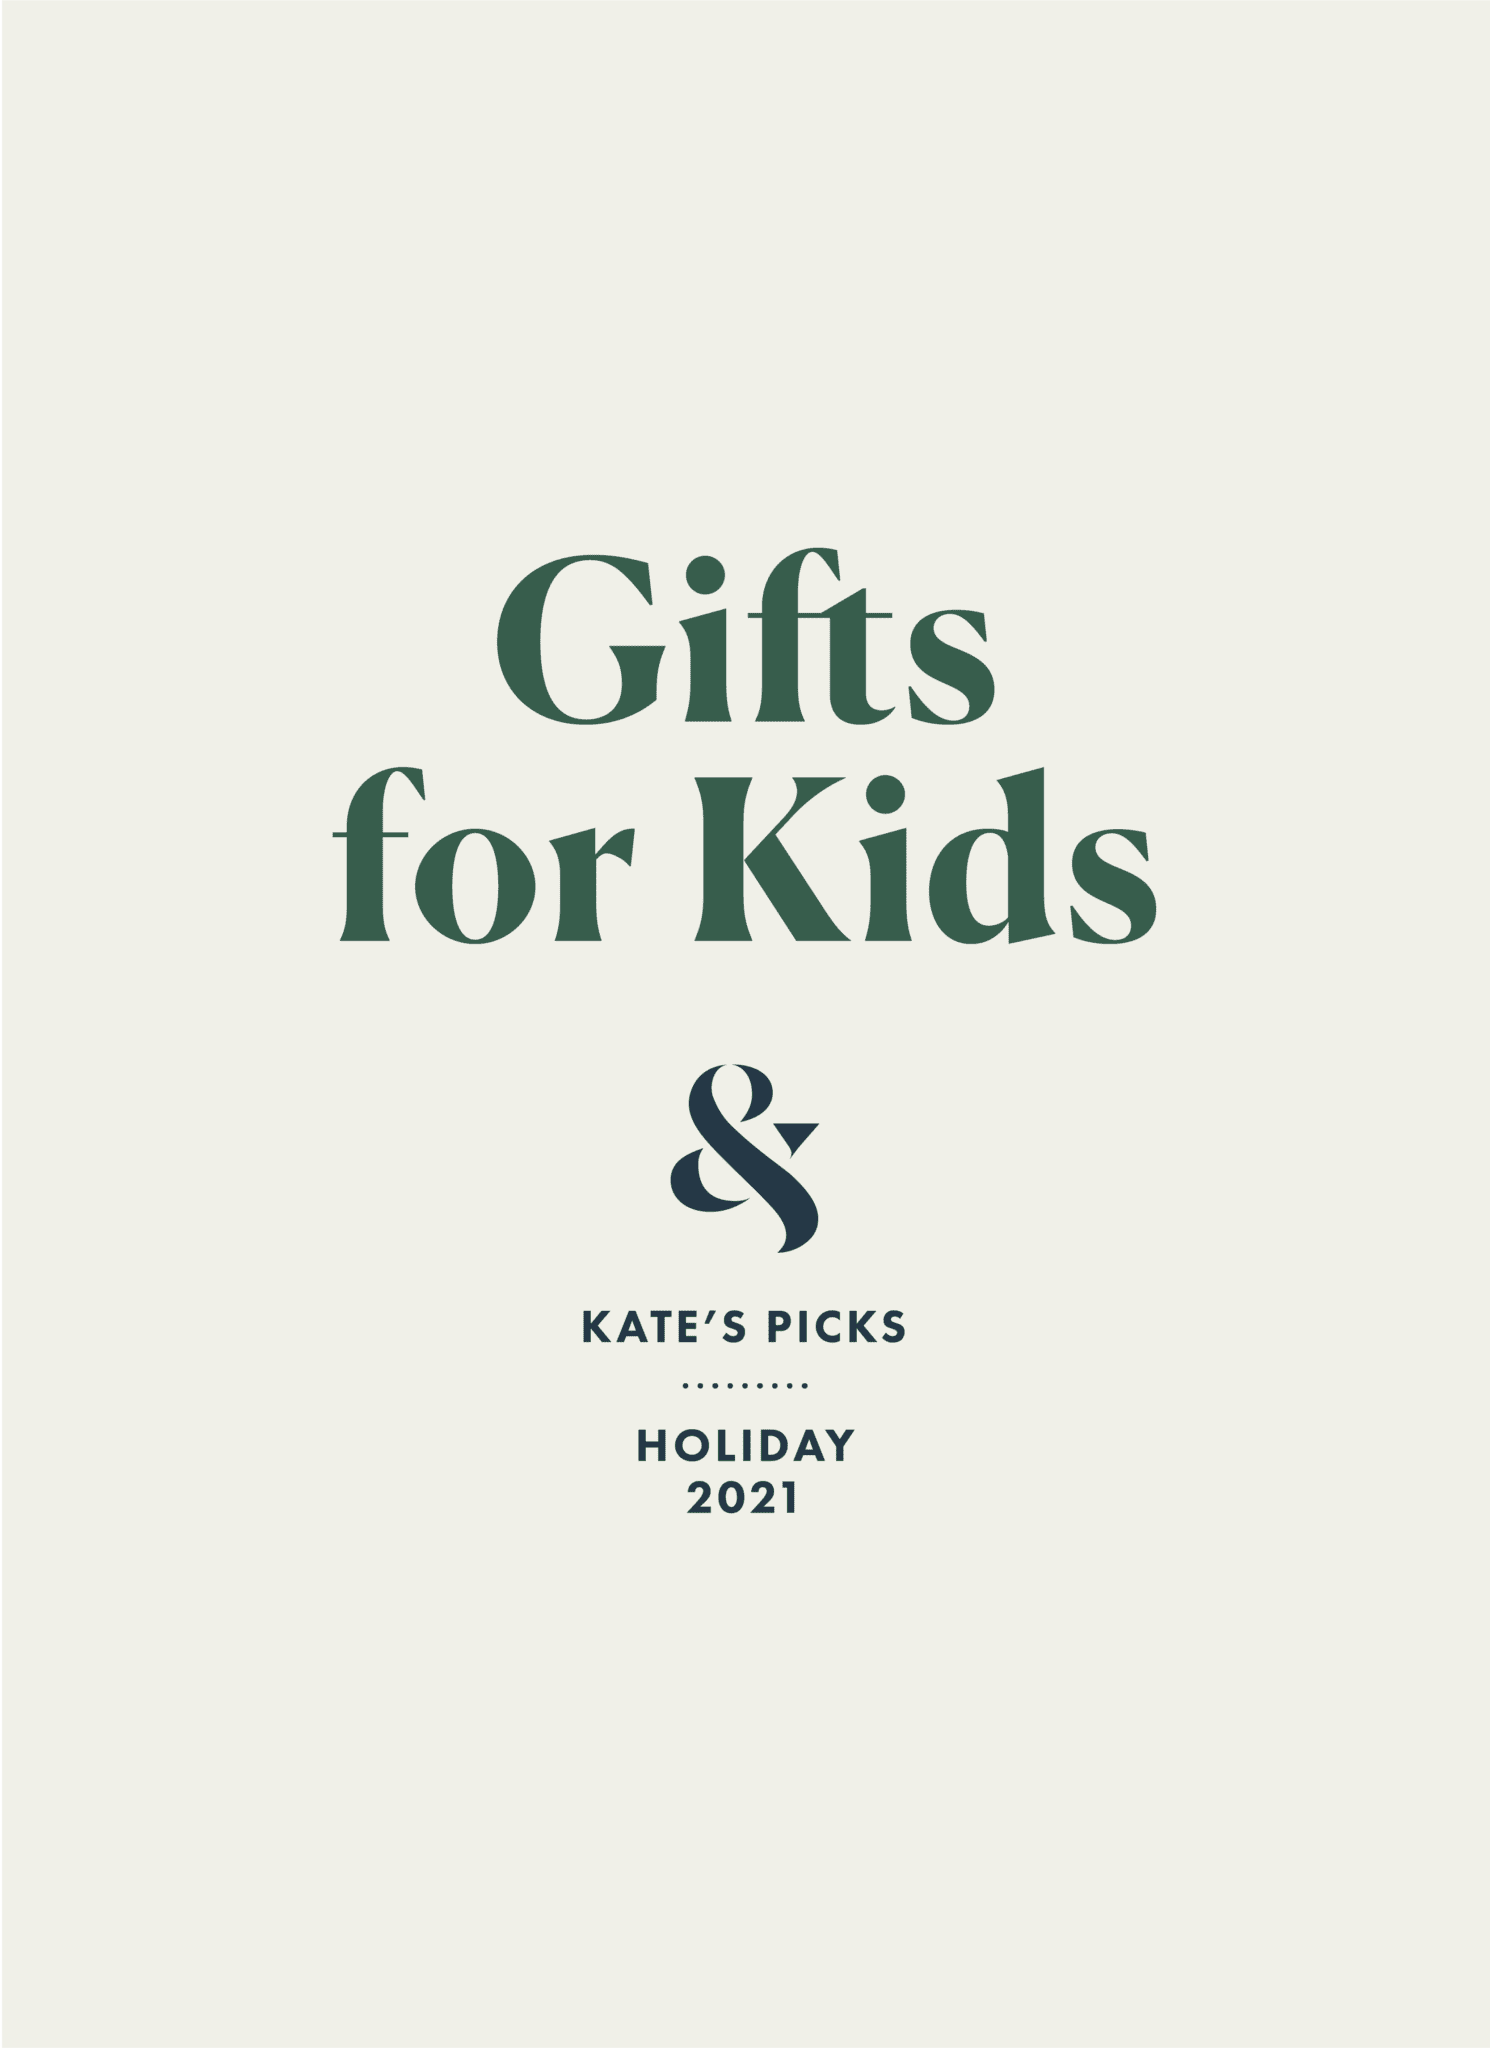 2021 Holiday Gift Guide: 12 Gifts for Kids | Wit & Delight | Designing ...